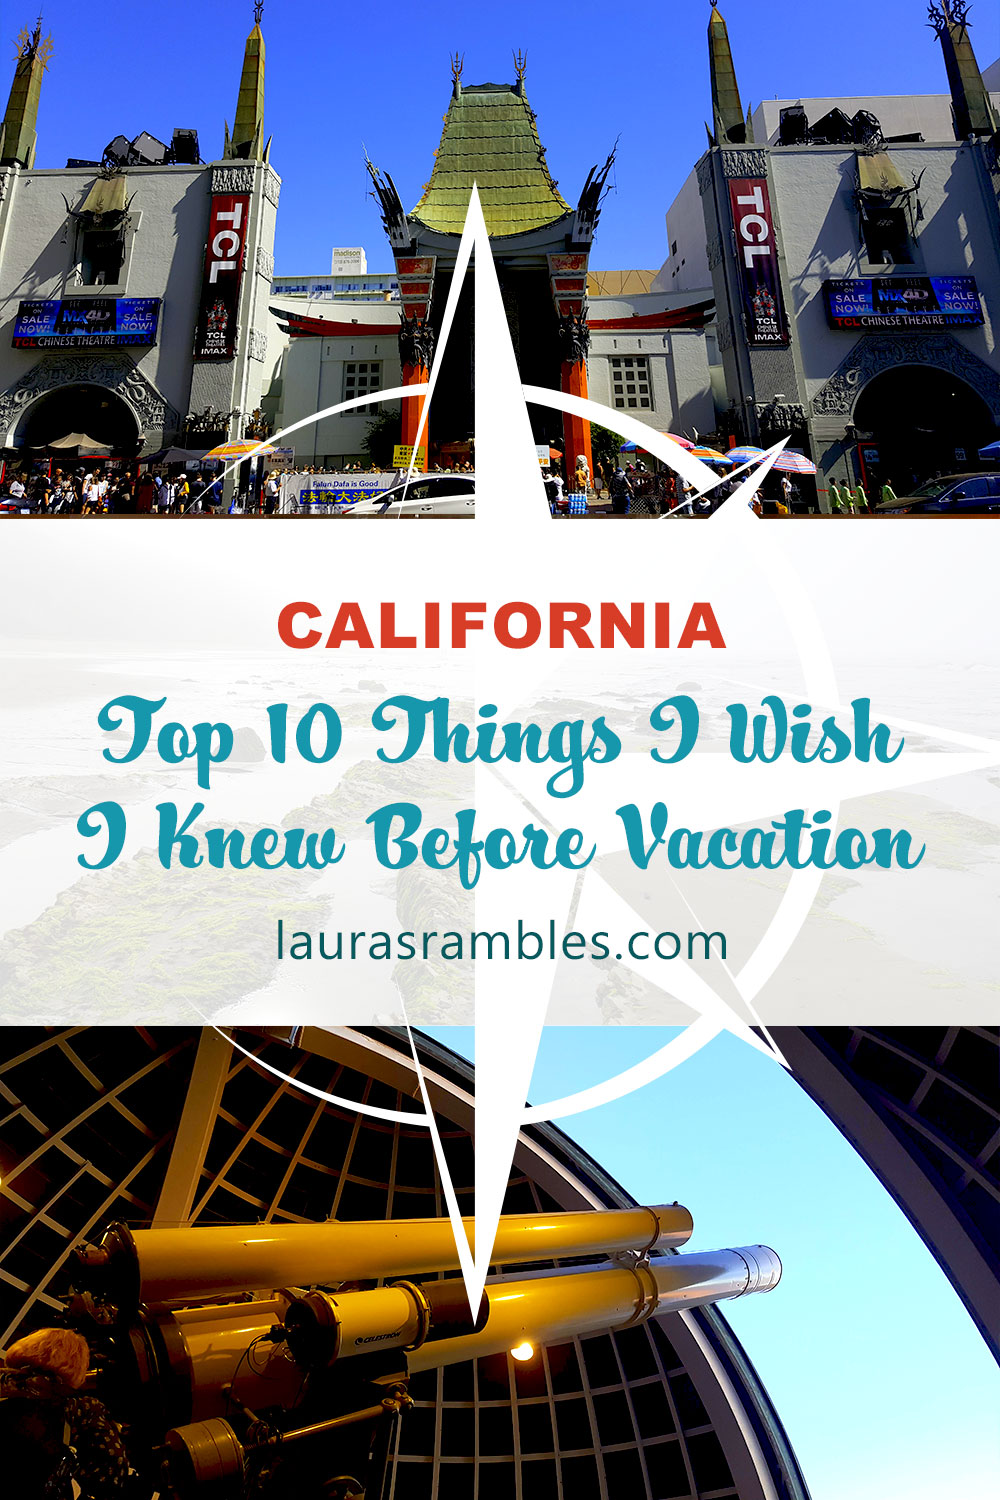 Pinterest - Top 10 things I wish I knew before vacation